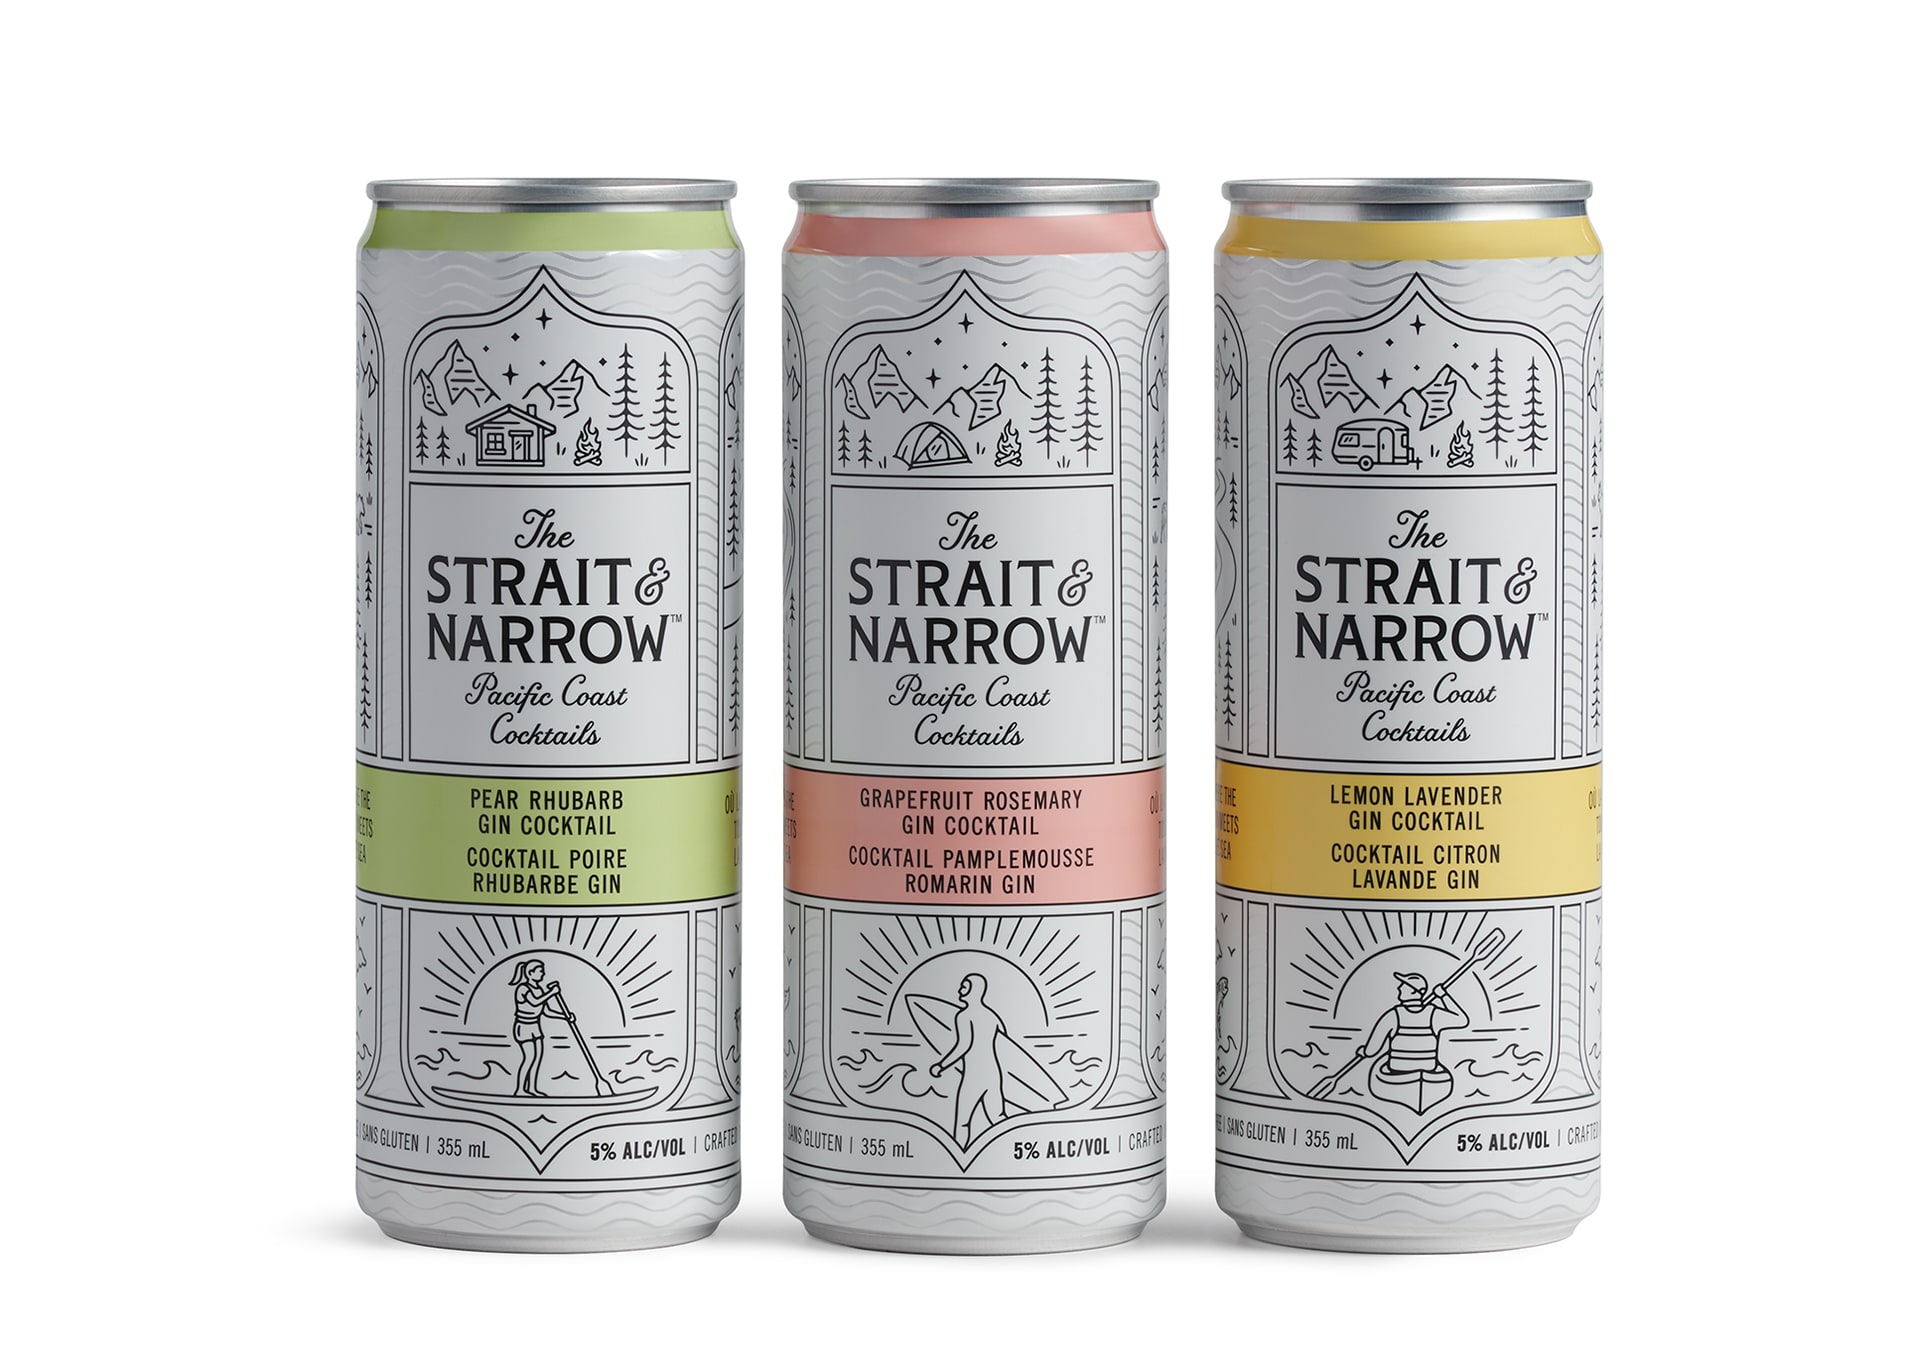 The Straight & Narrow RTD cocktails cans group